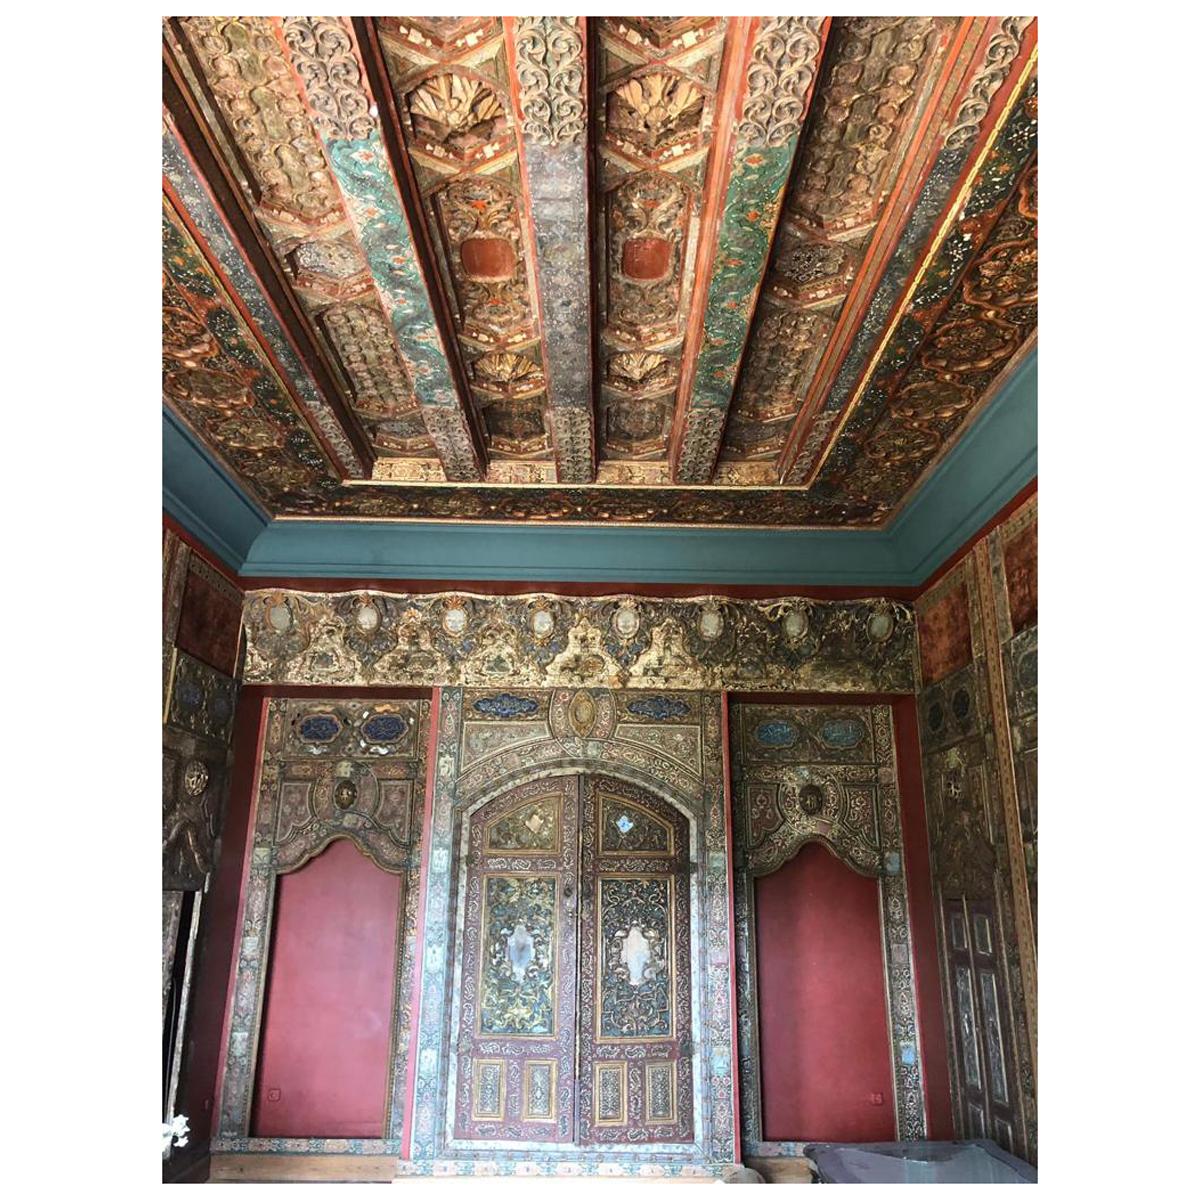 18th Century Ottoman Period Syrian Ajami Art Painted Wood Panelled Room